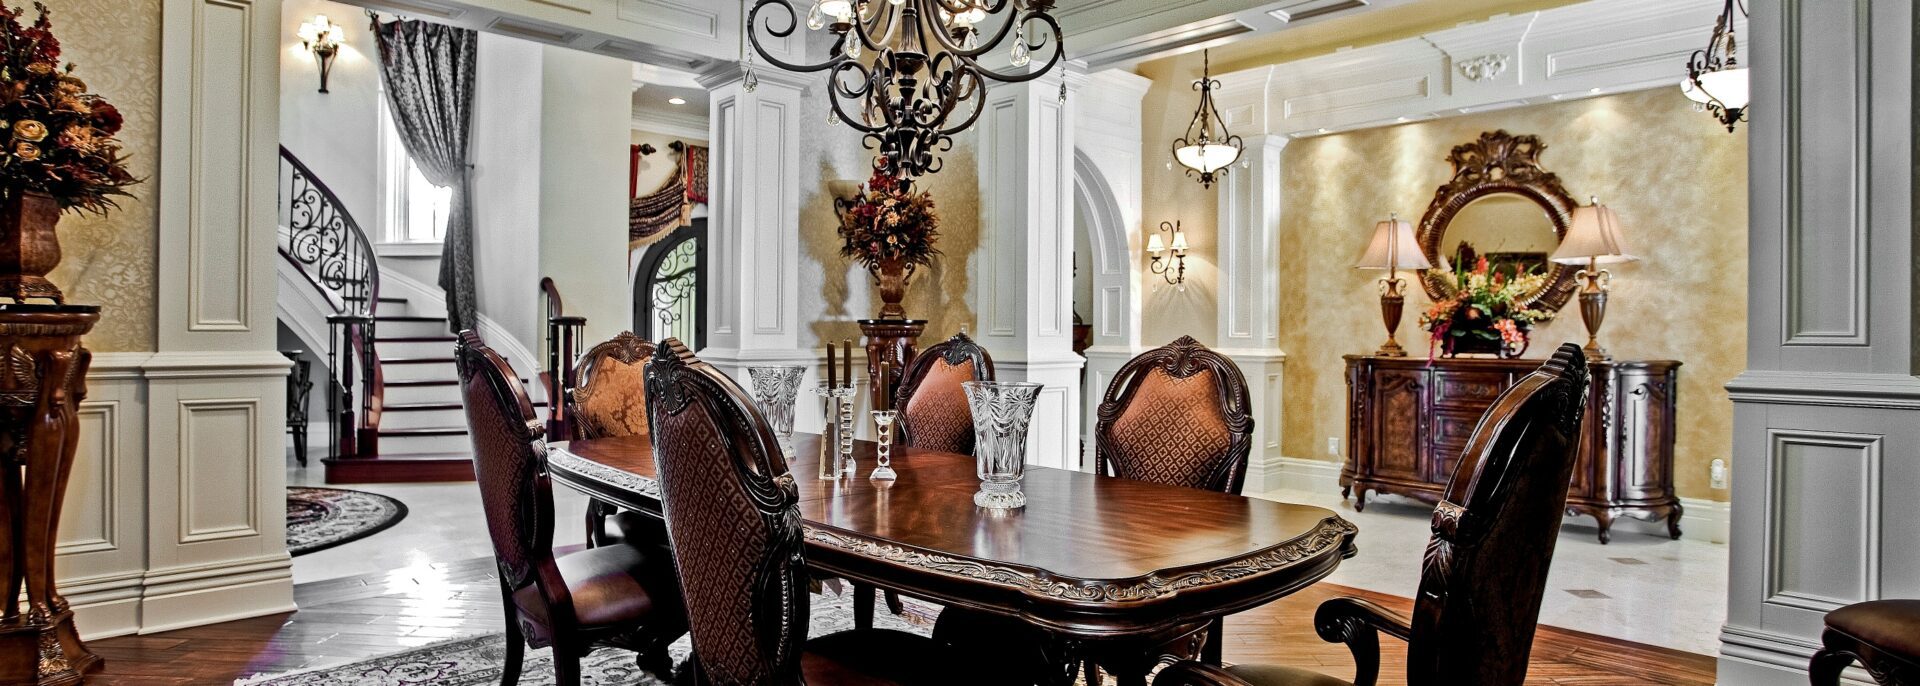 A dining room table with chairs and a chandelier.